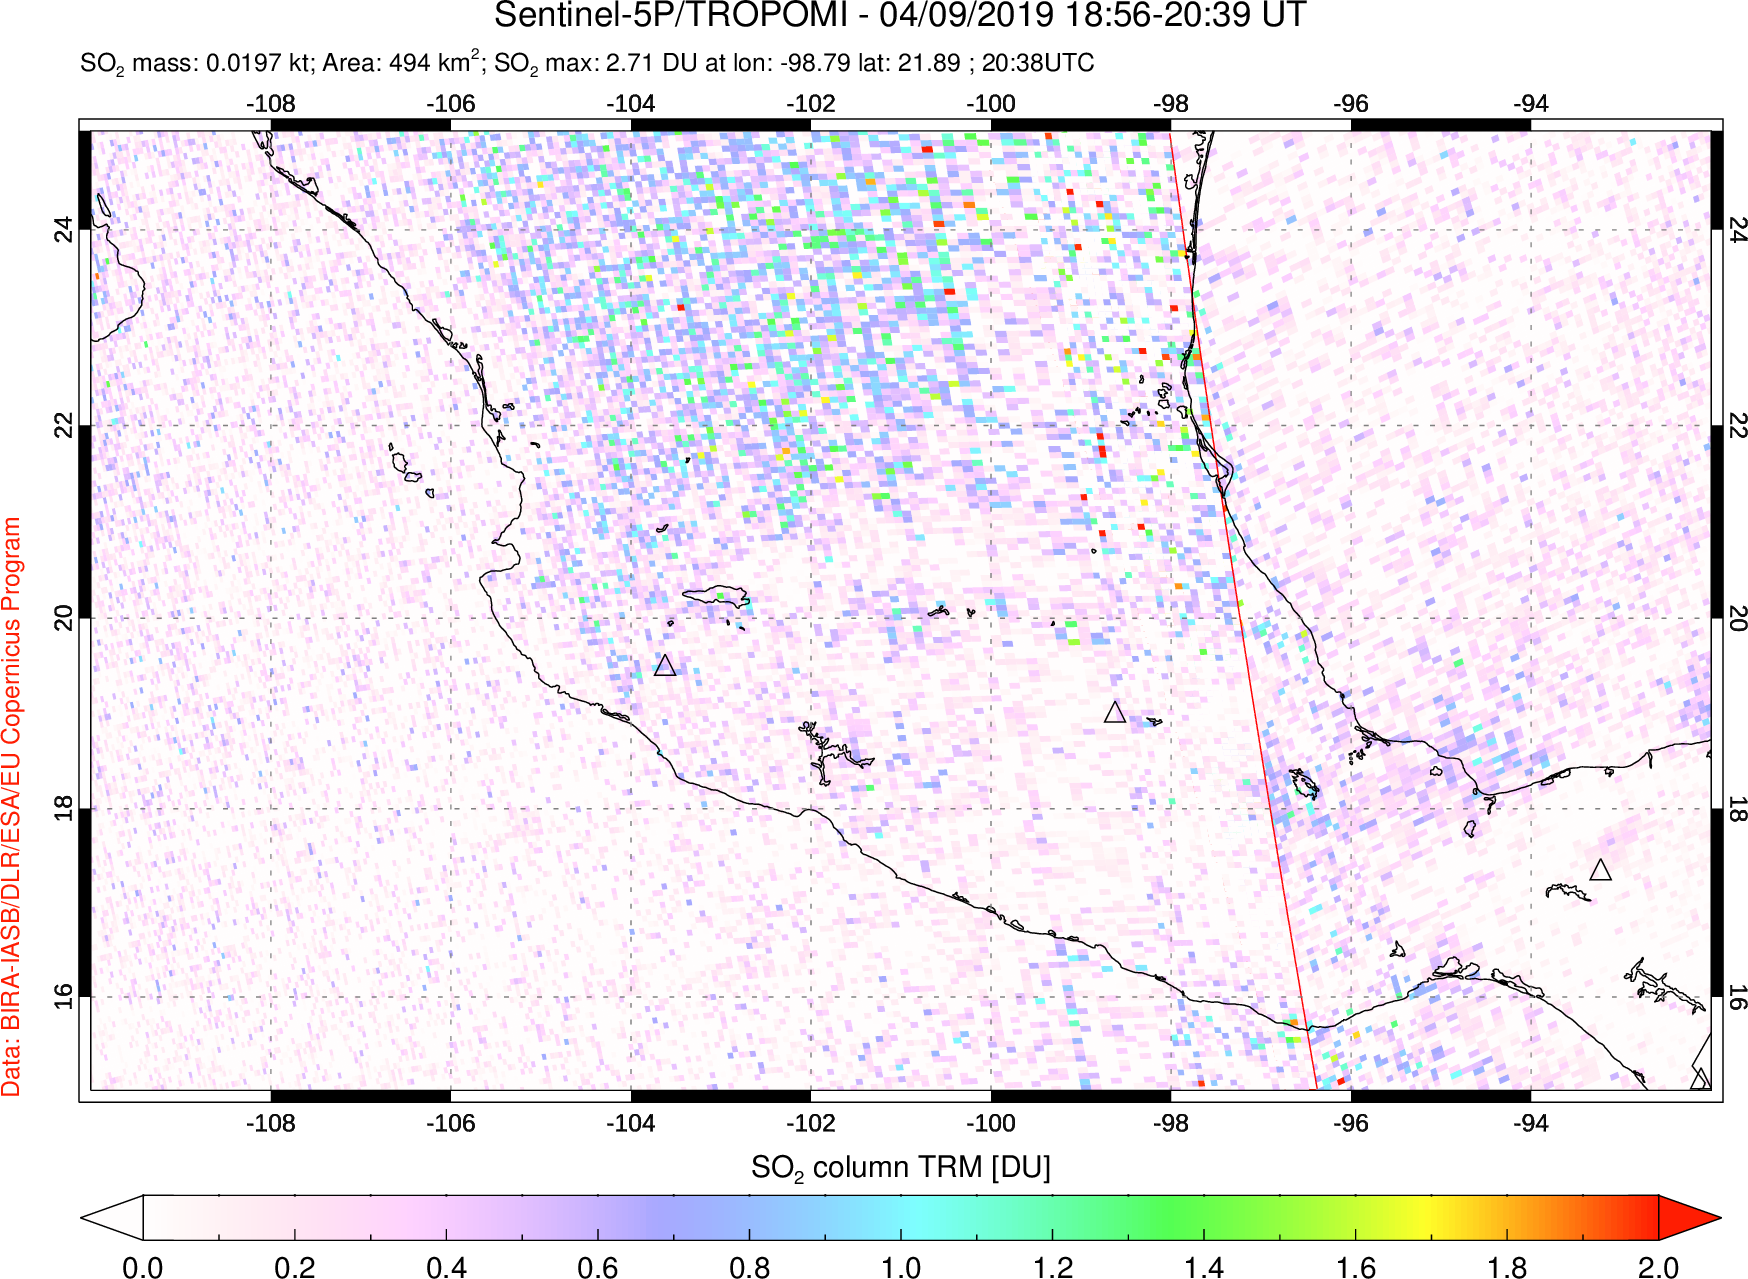 A sulfur dioxide image over Mexico on Apr 09, 2019.